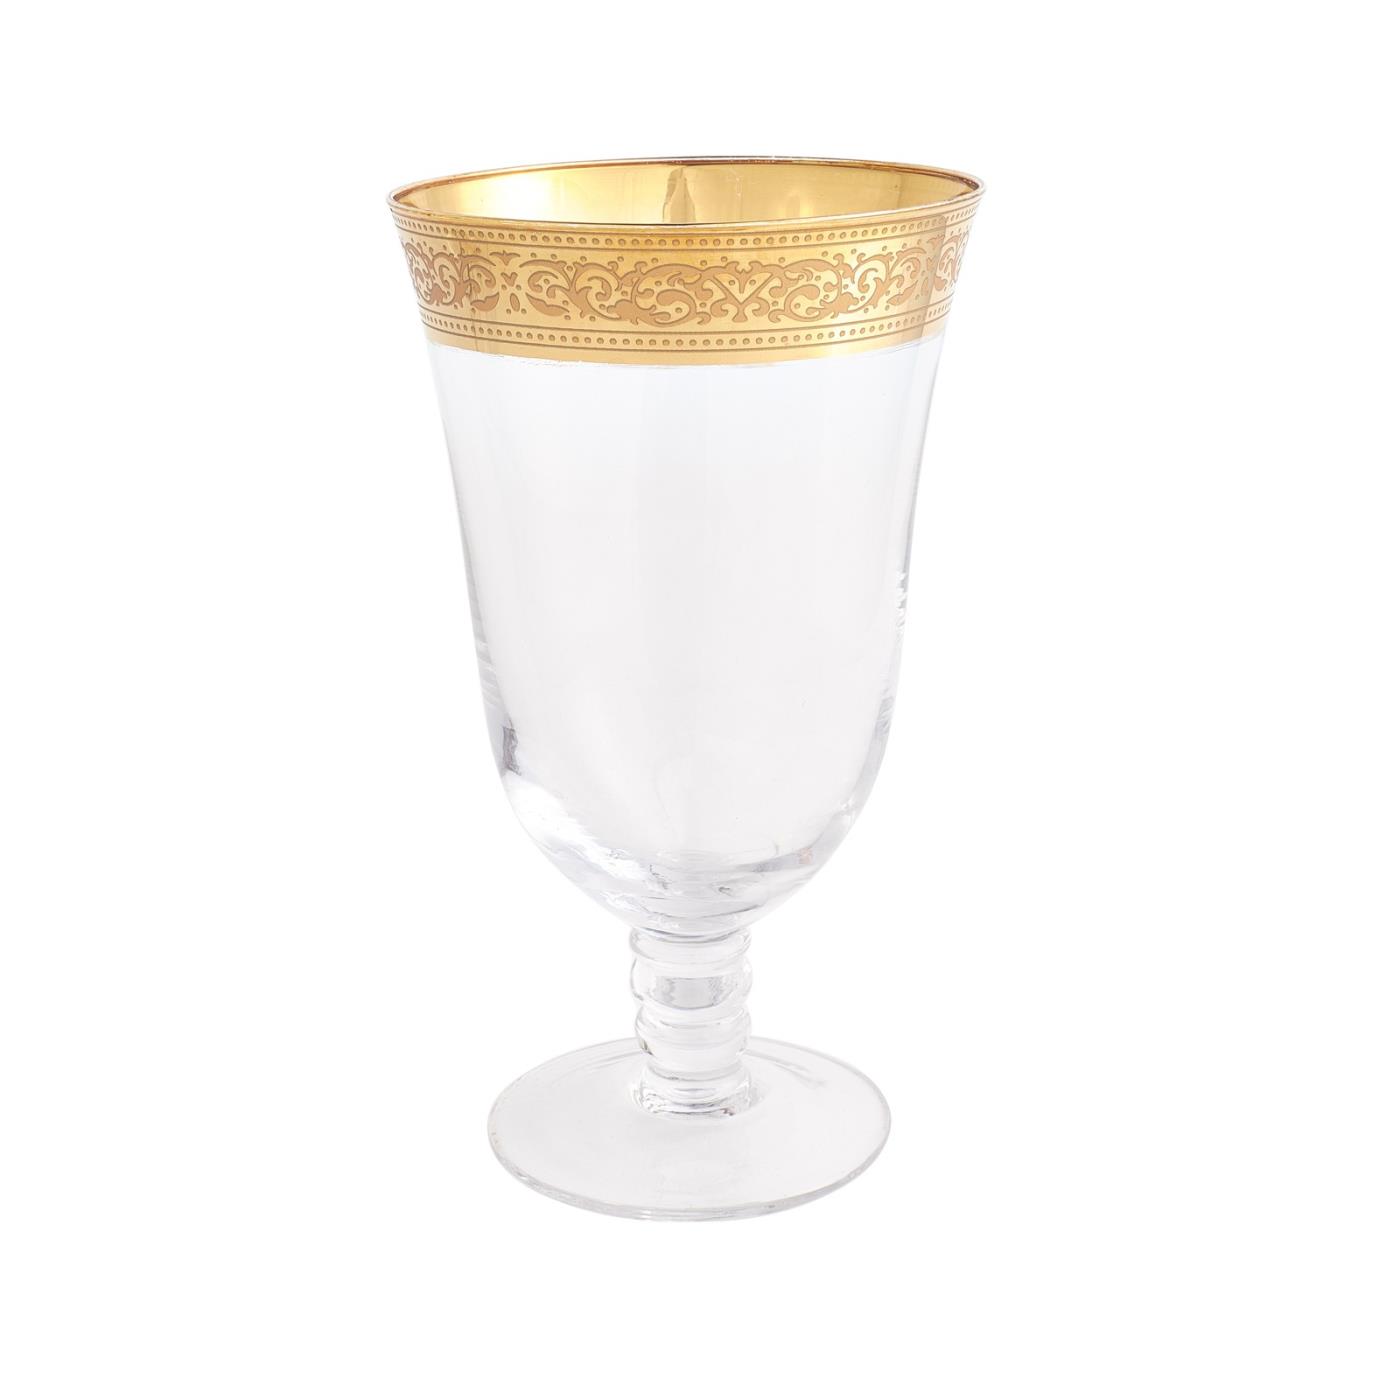 Majestic Gold - Water Goblet 16 oz